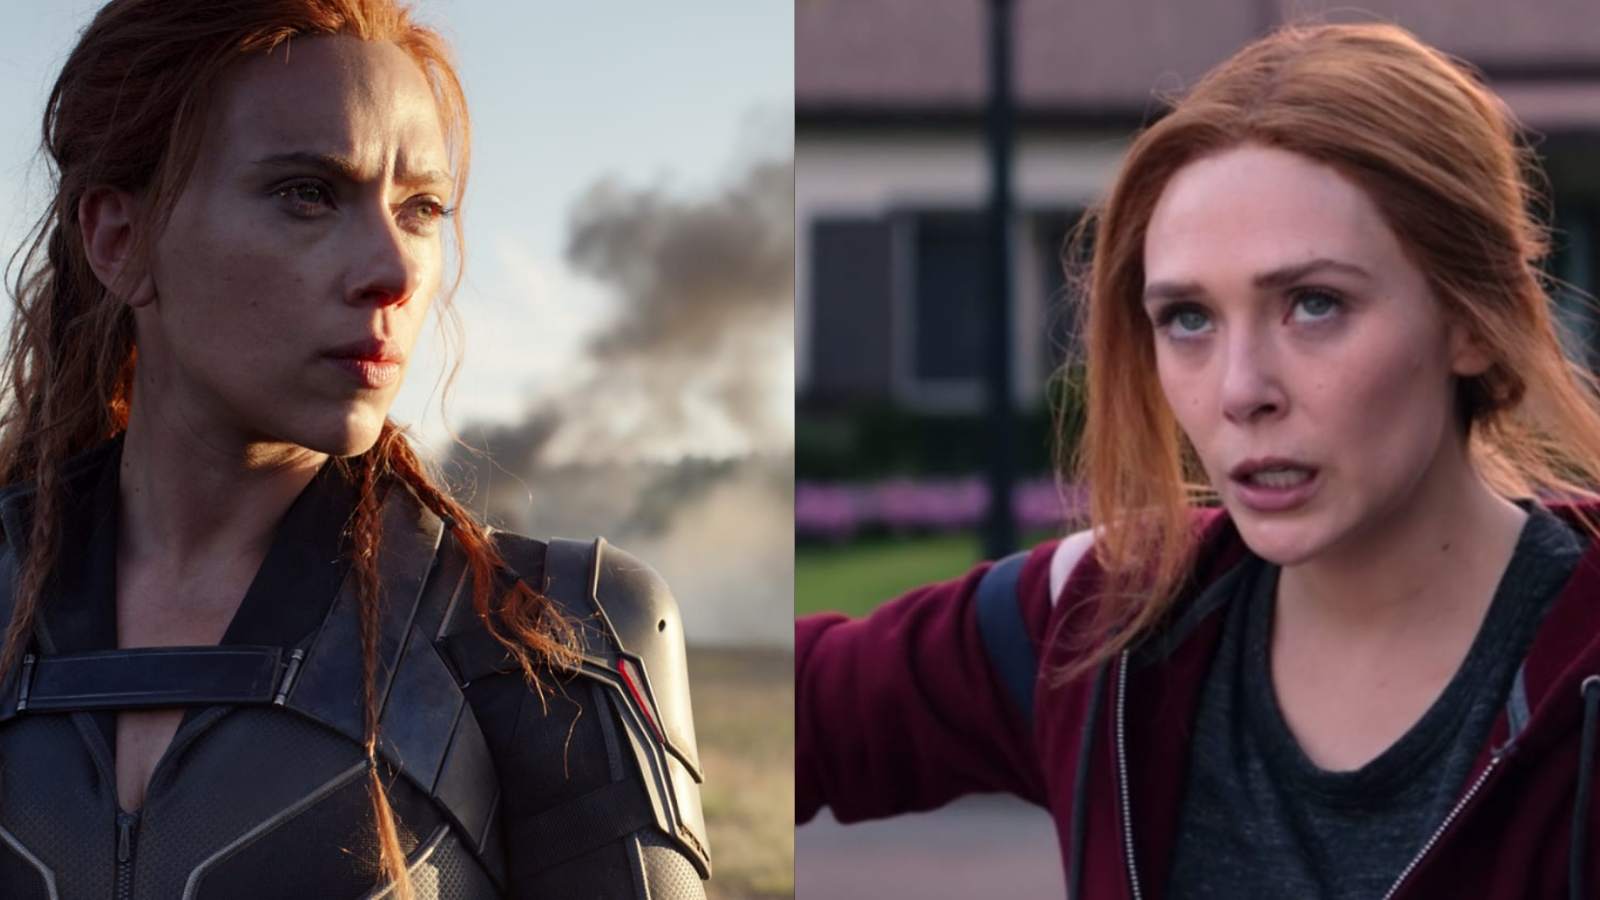 First releases of Phase 4: Black Widow and Wanda Vision